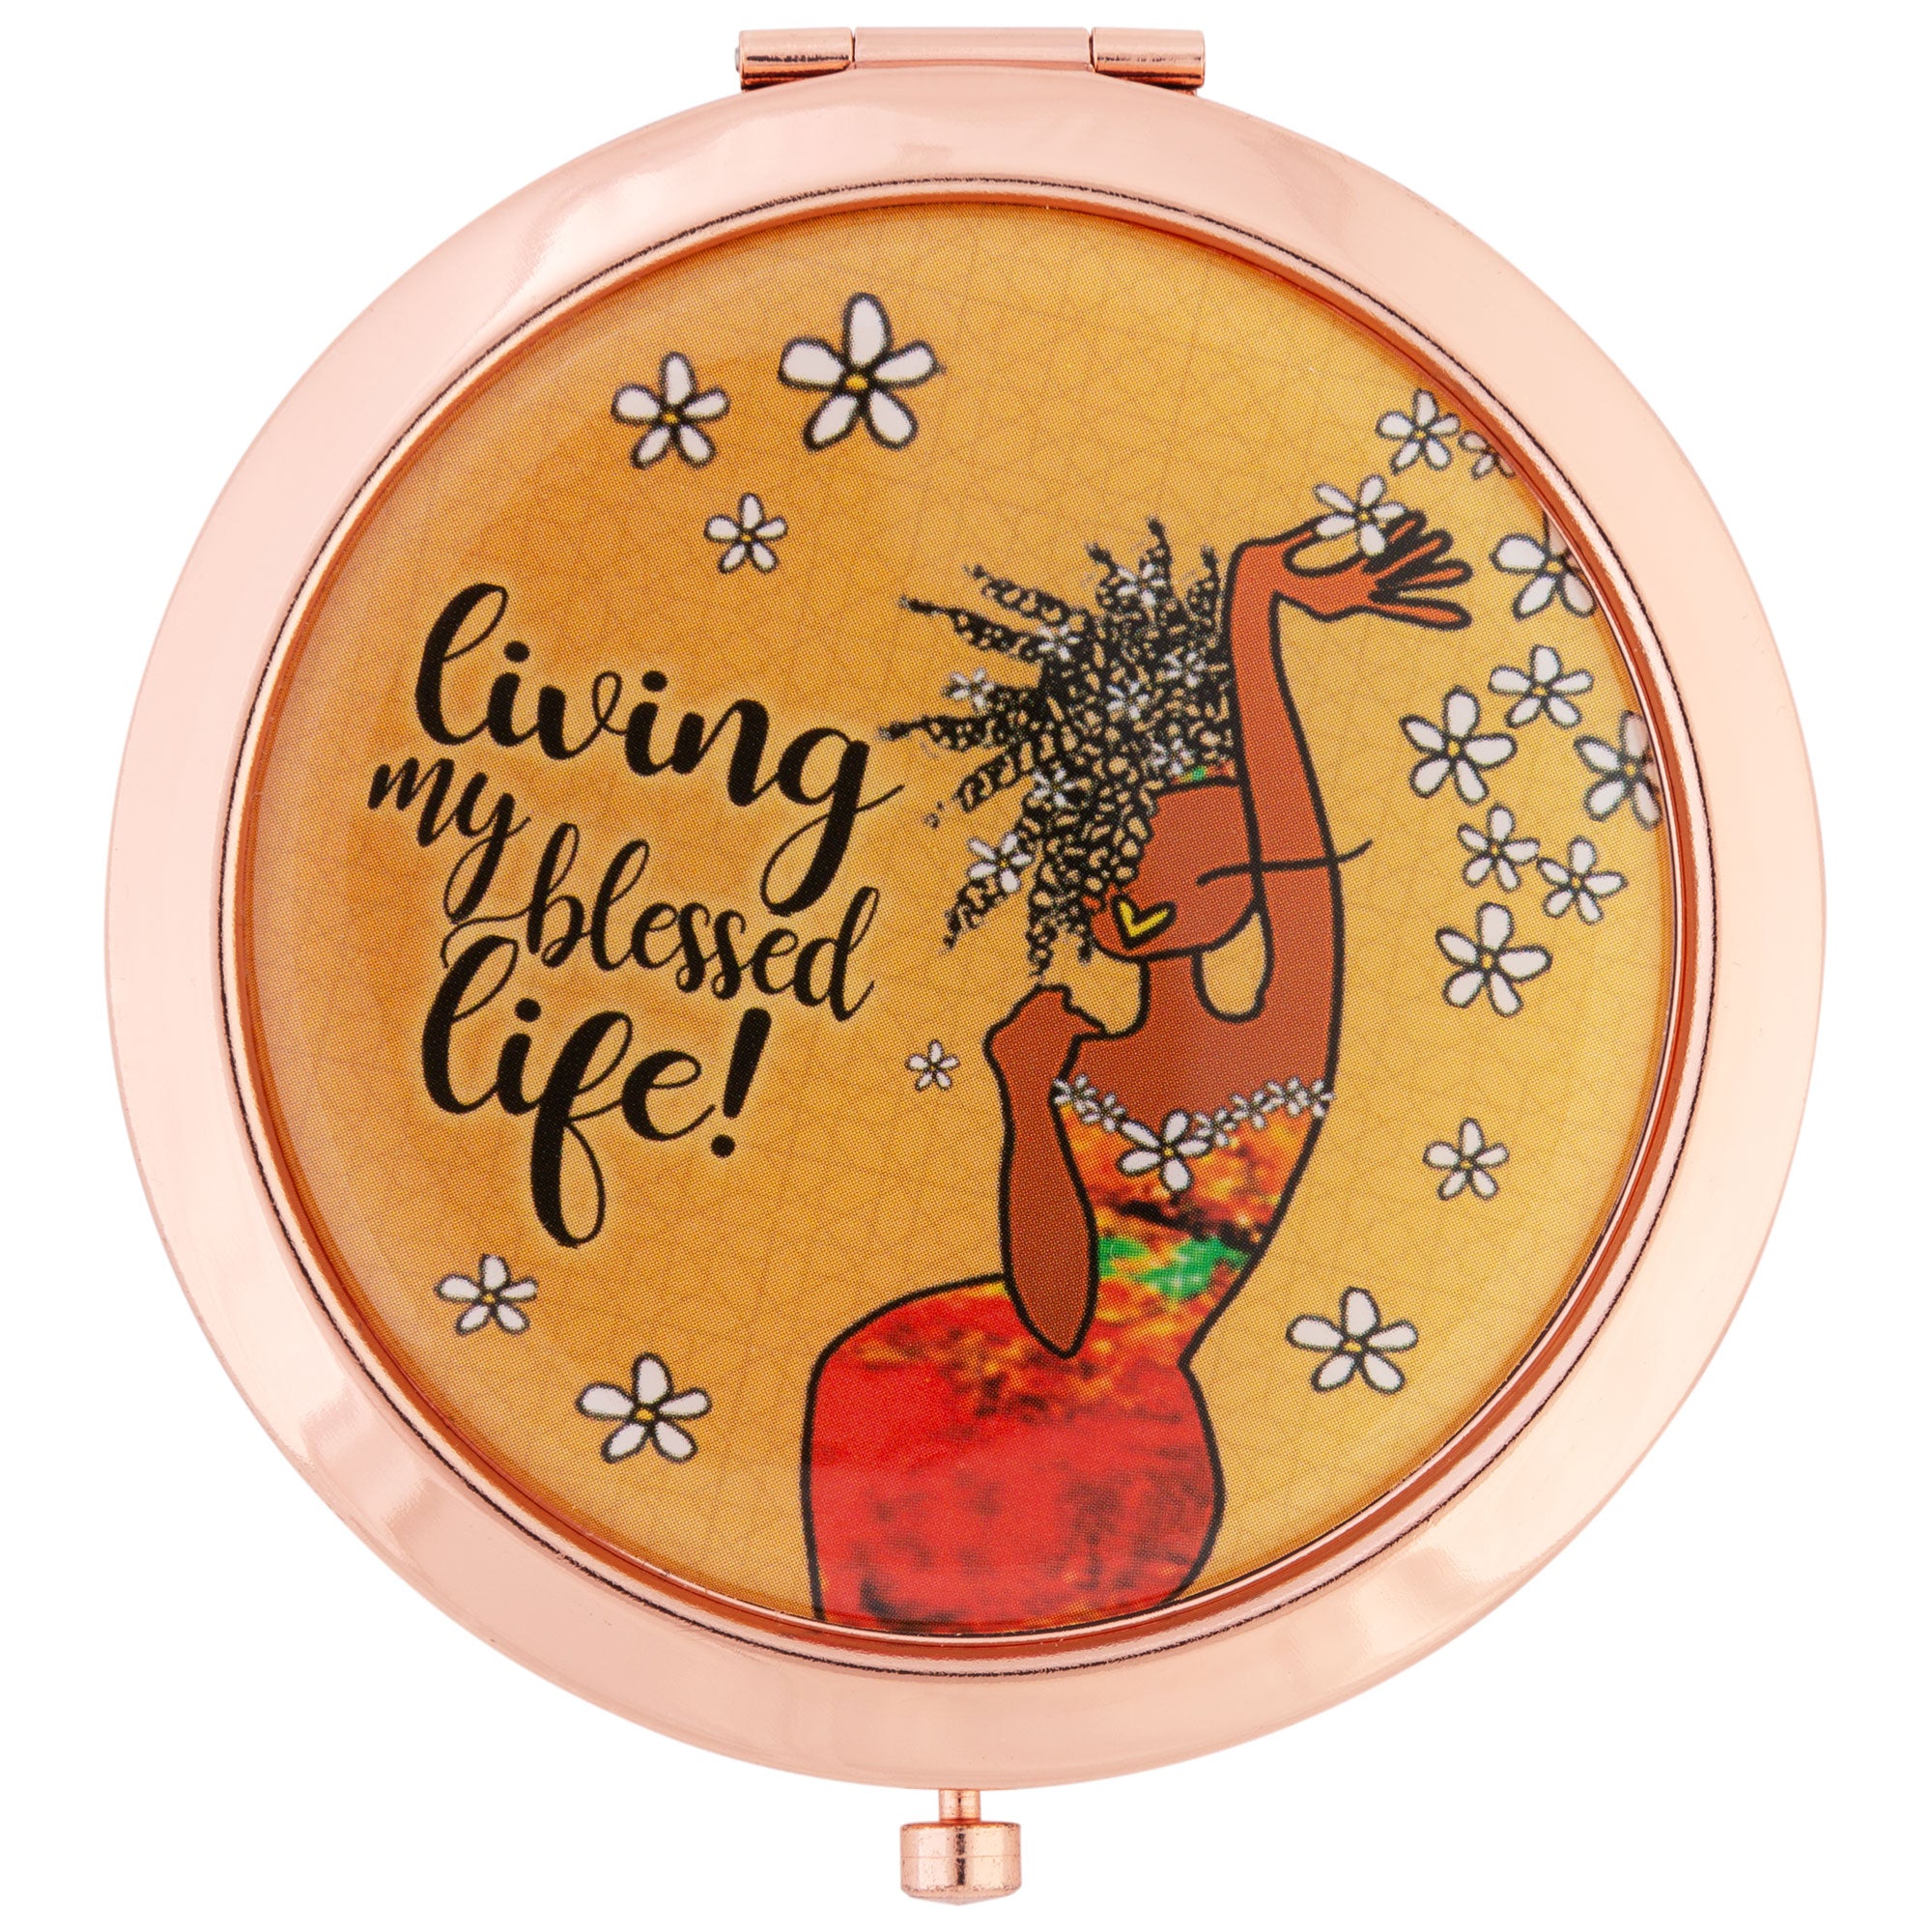 Shades Of Color Magnetic Compact Mirror - Living My Blessed Life